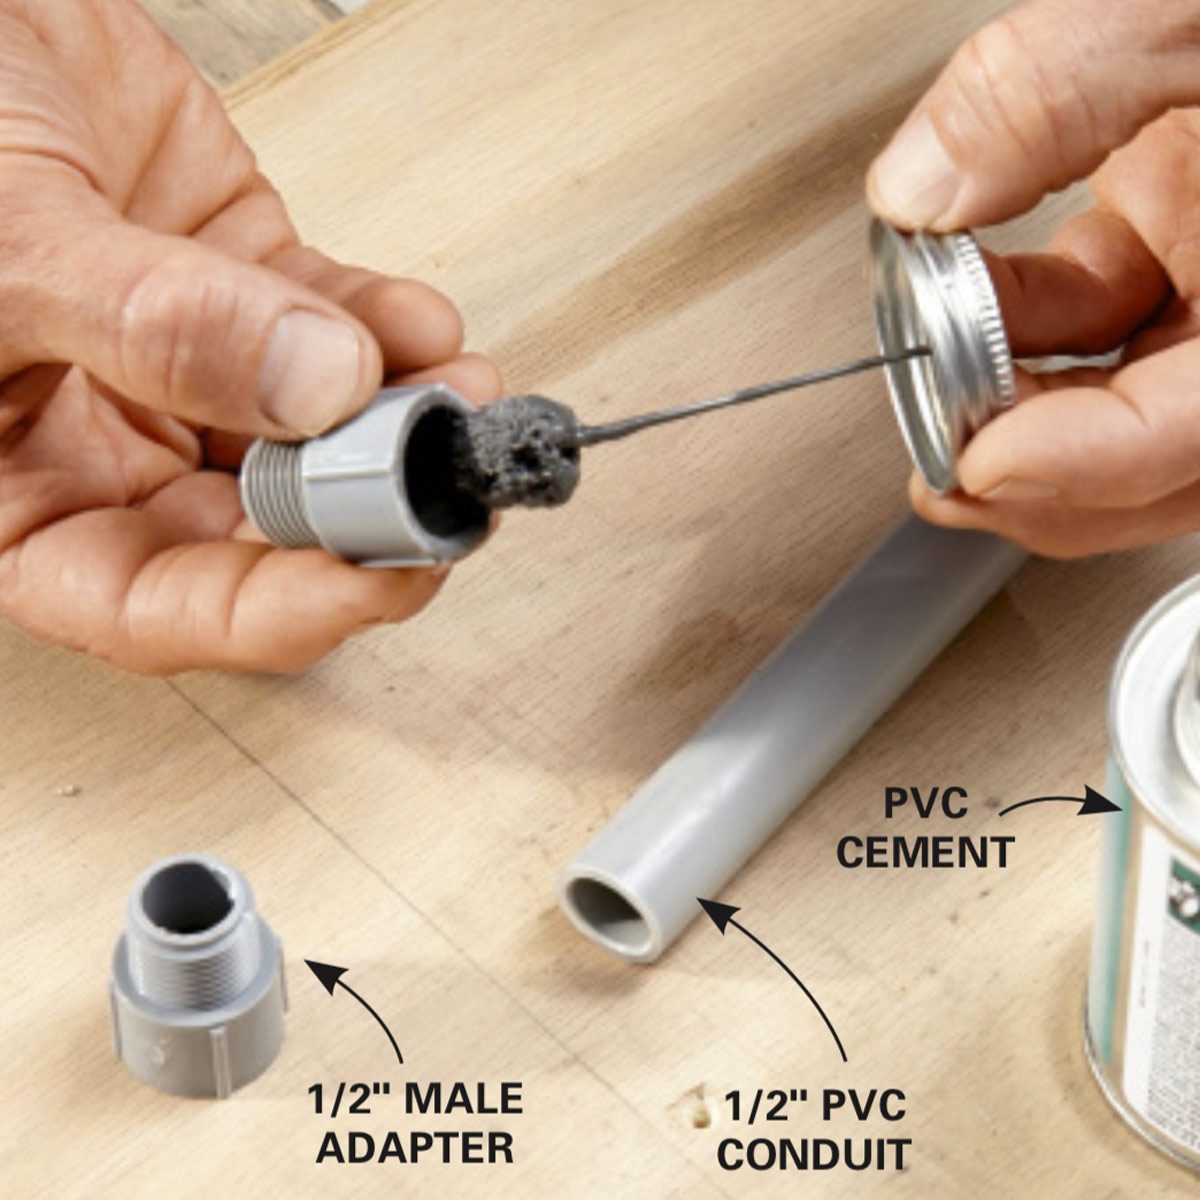 working with PVC conduit